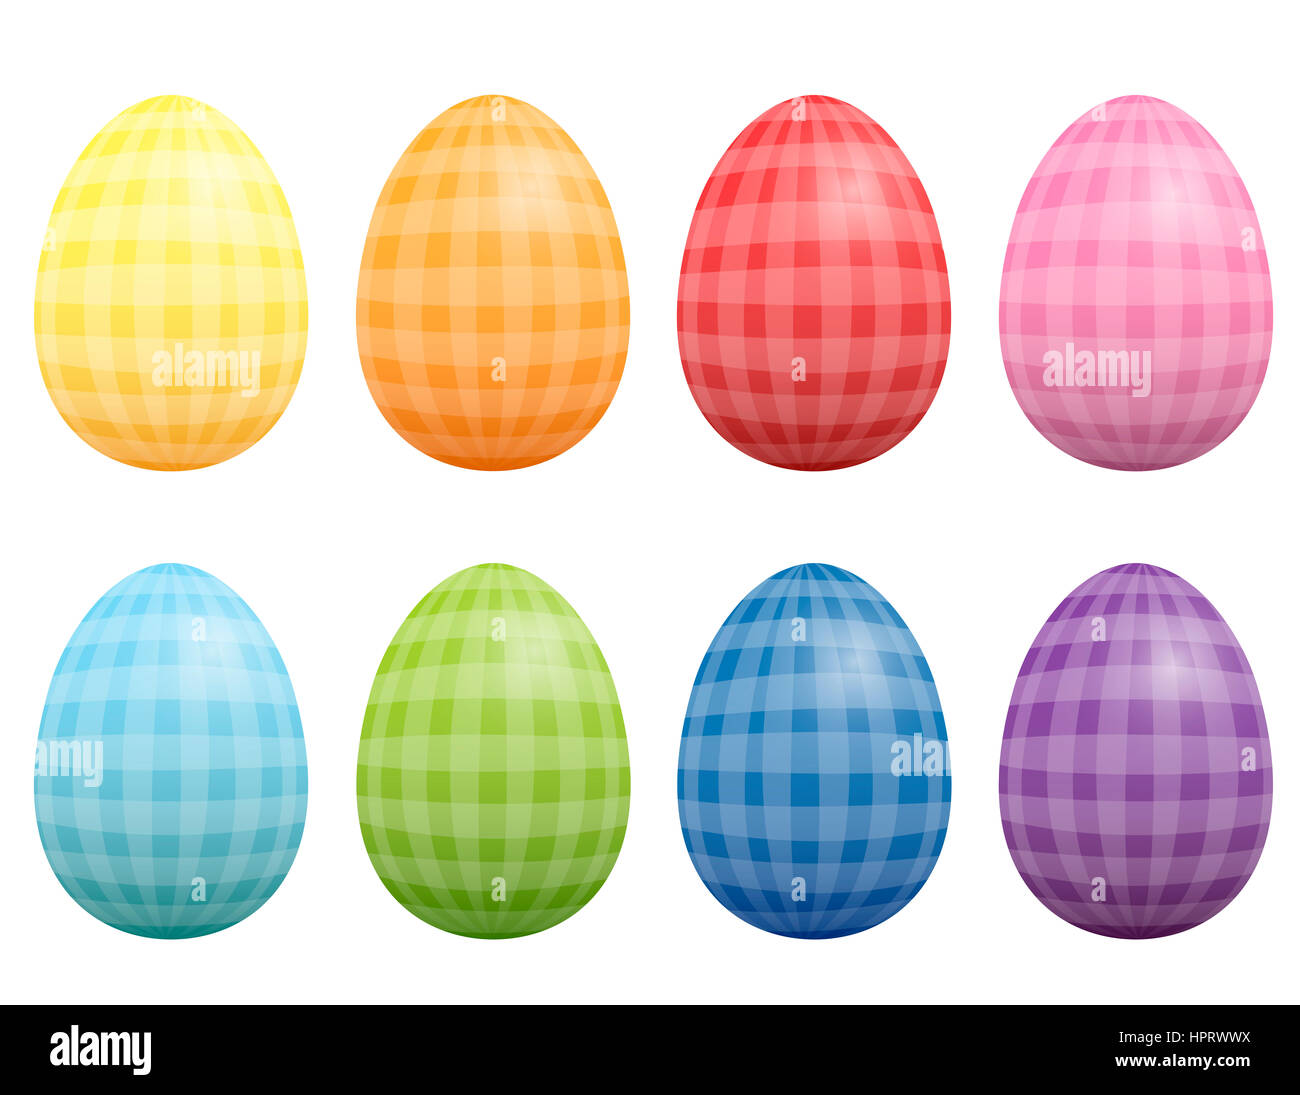 Easter eggs vintage style, with checked gingham pattern. Stock Photo